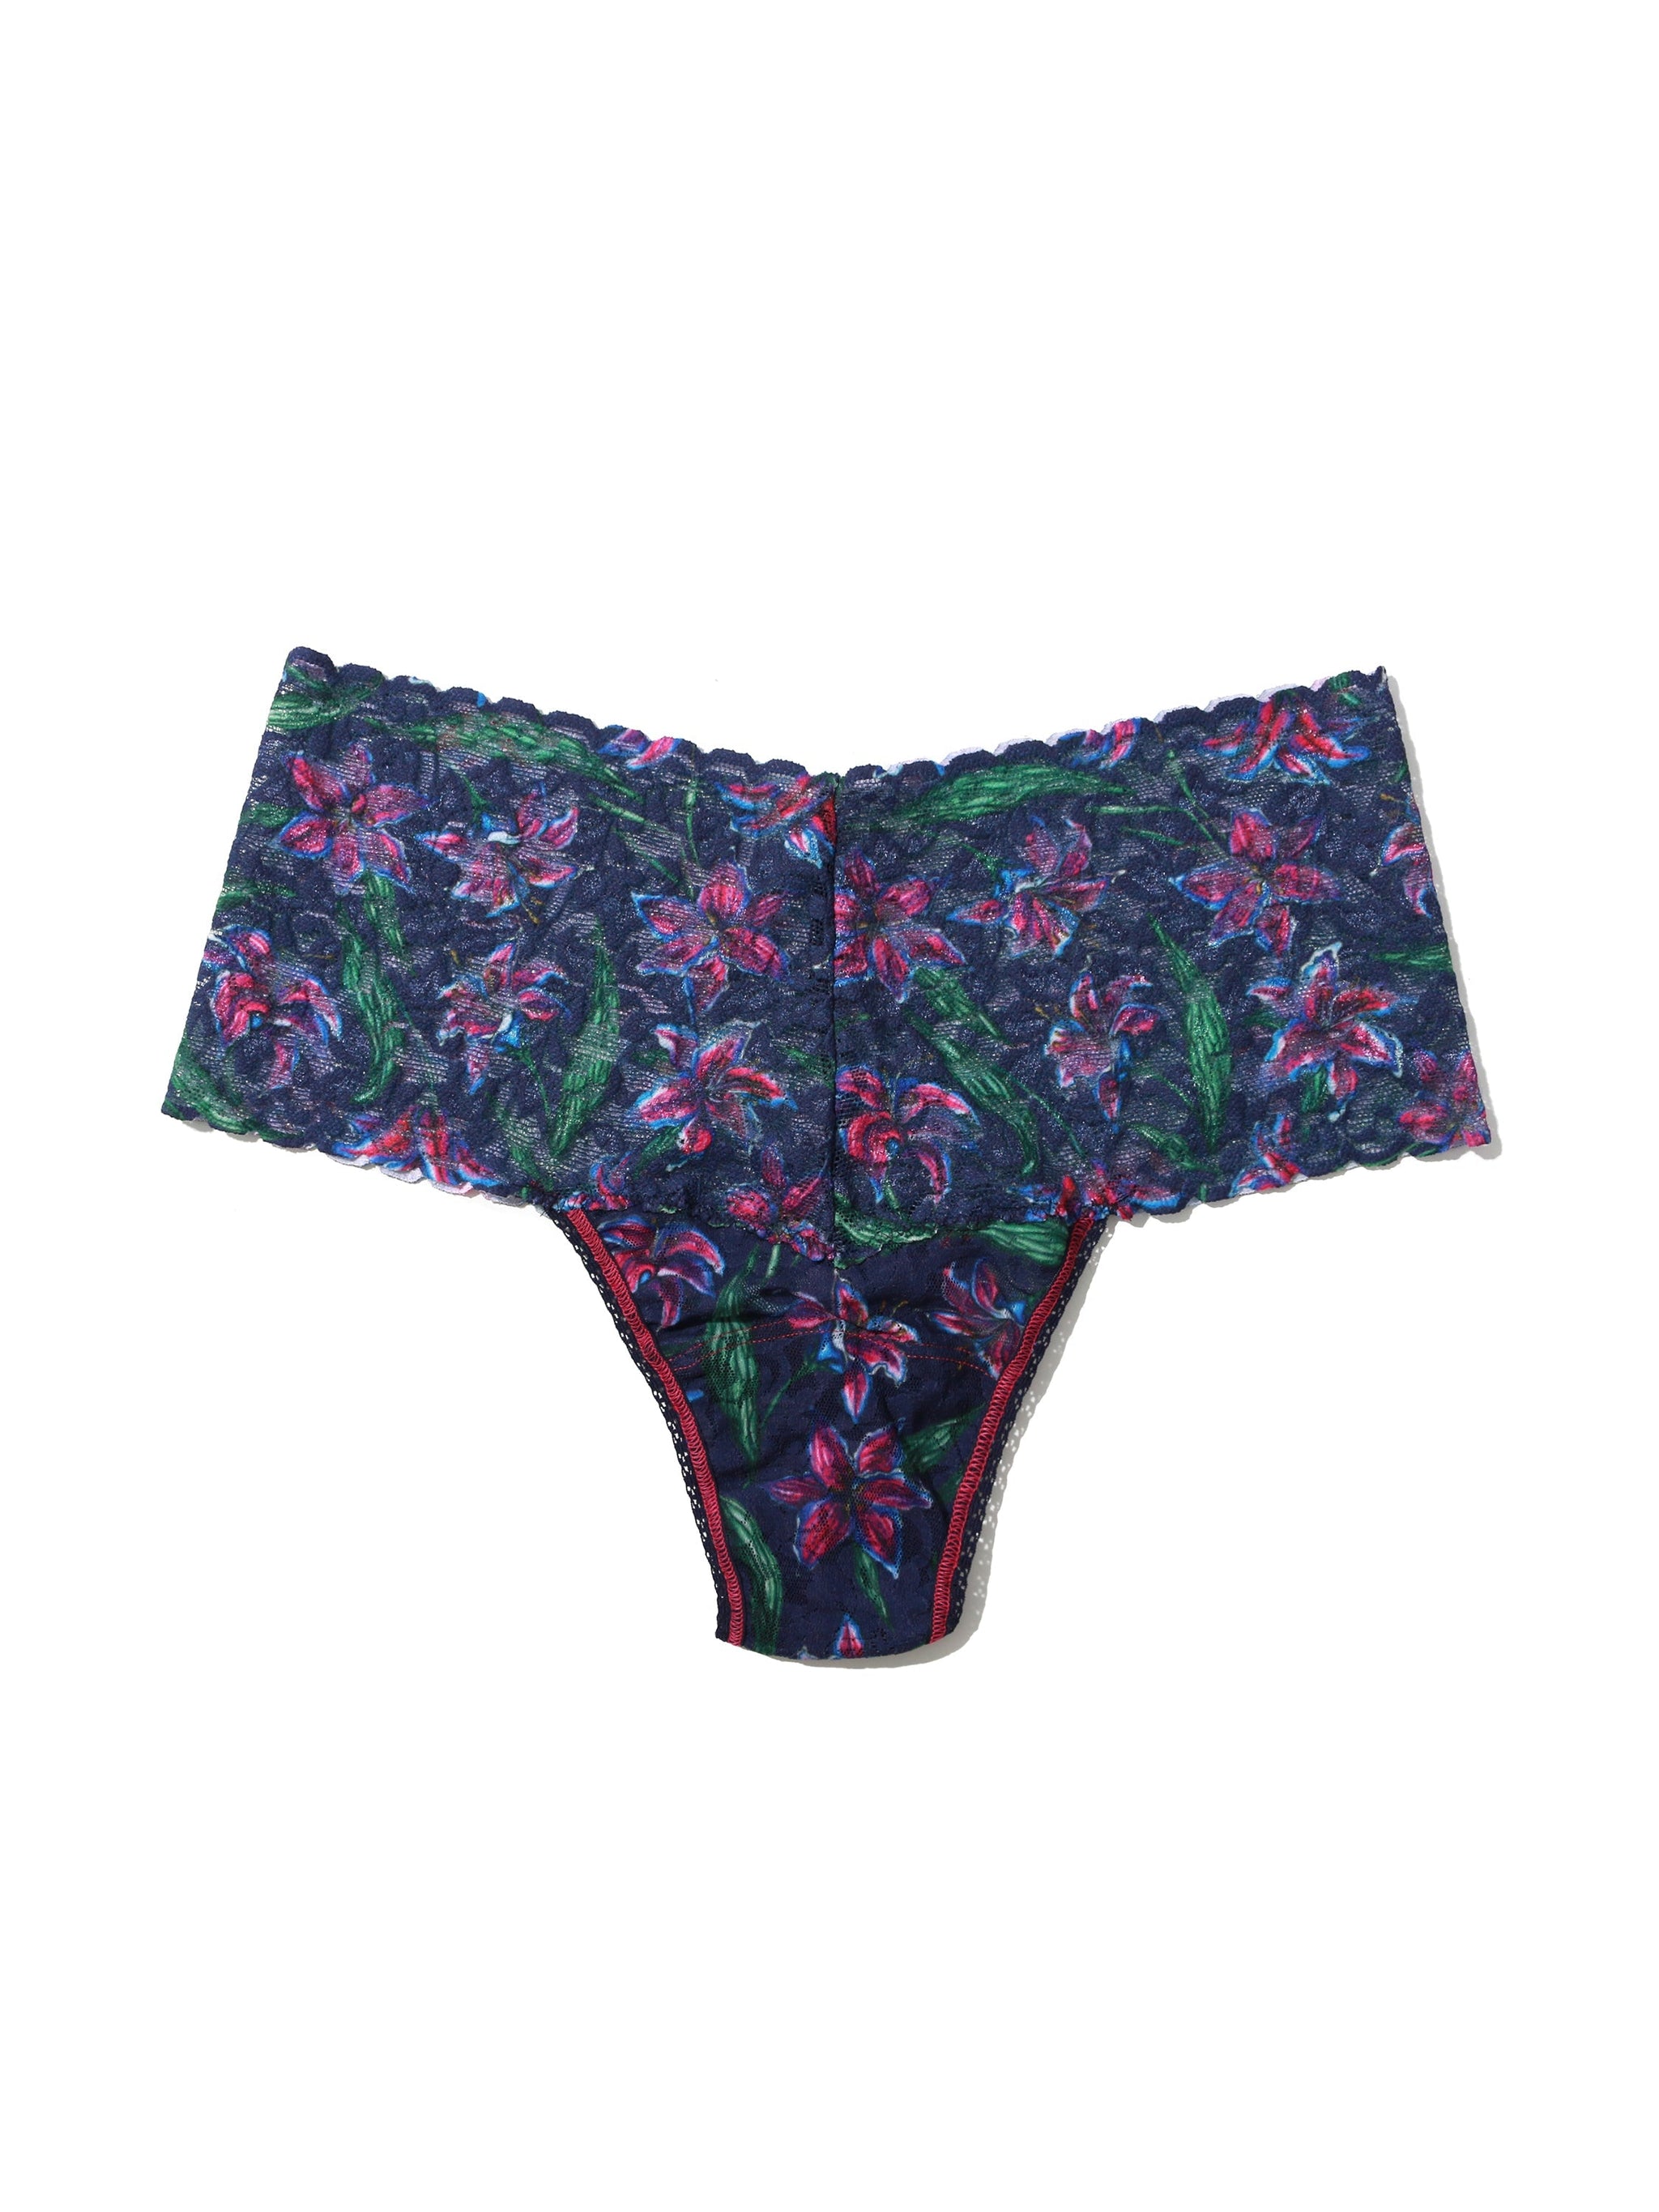 Printed Retro Lace Thong Twilight Bloom Sale